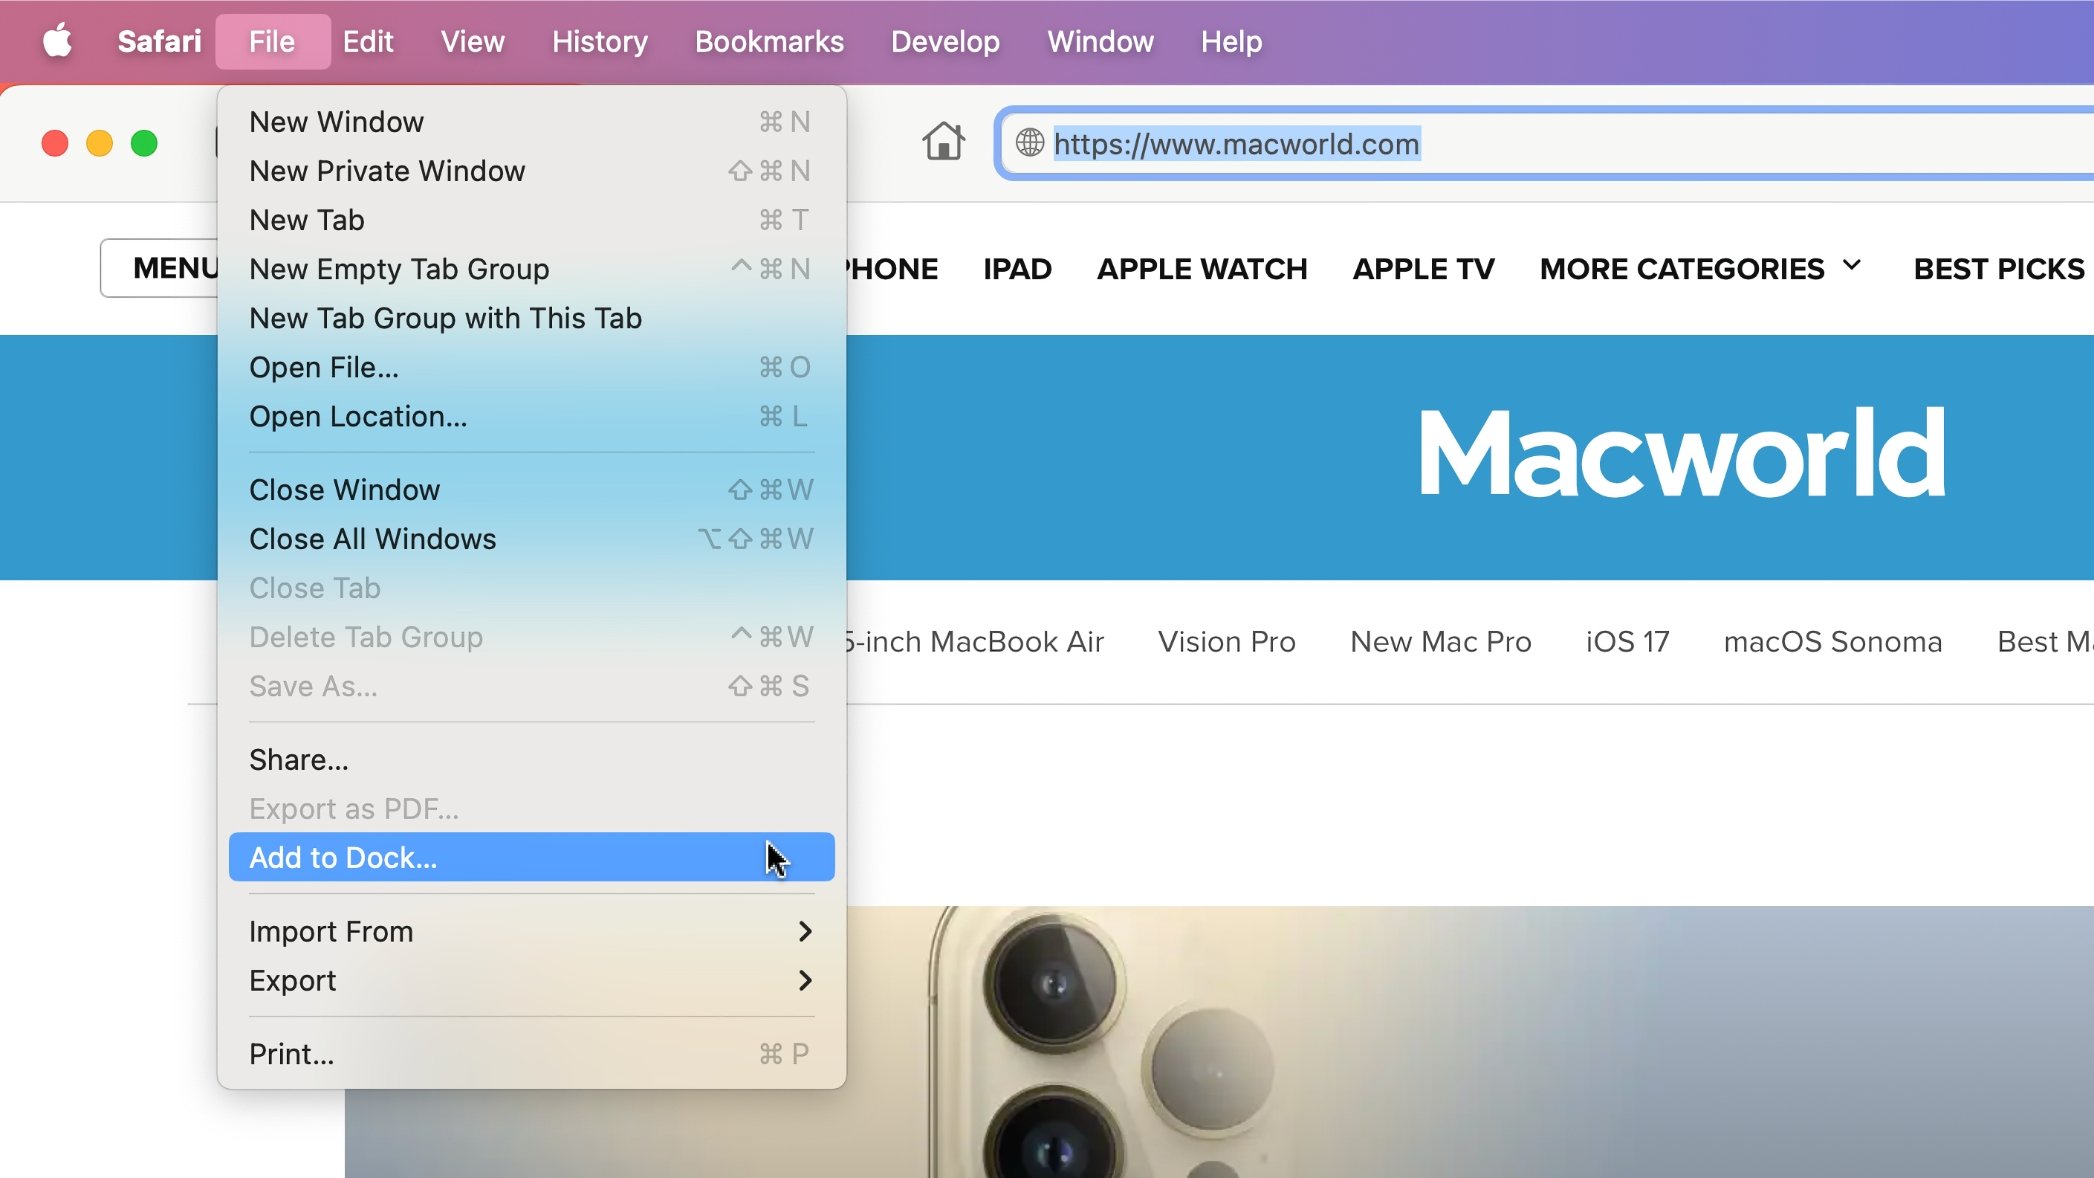 macOS Sonoma: How to make and use web apps